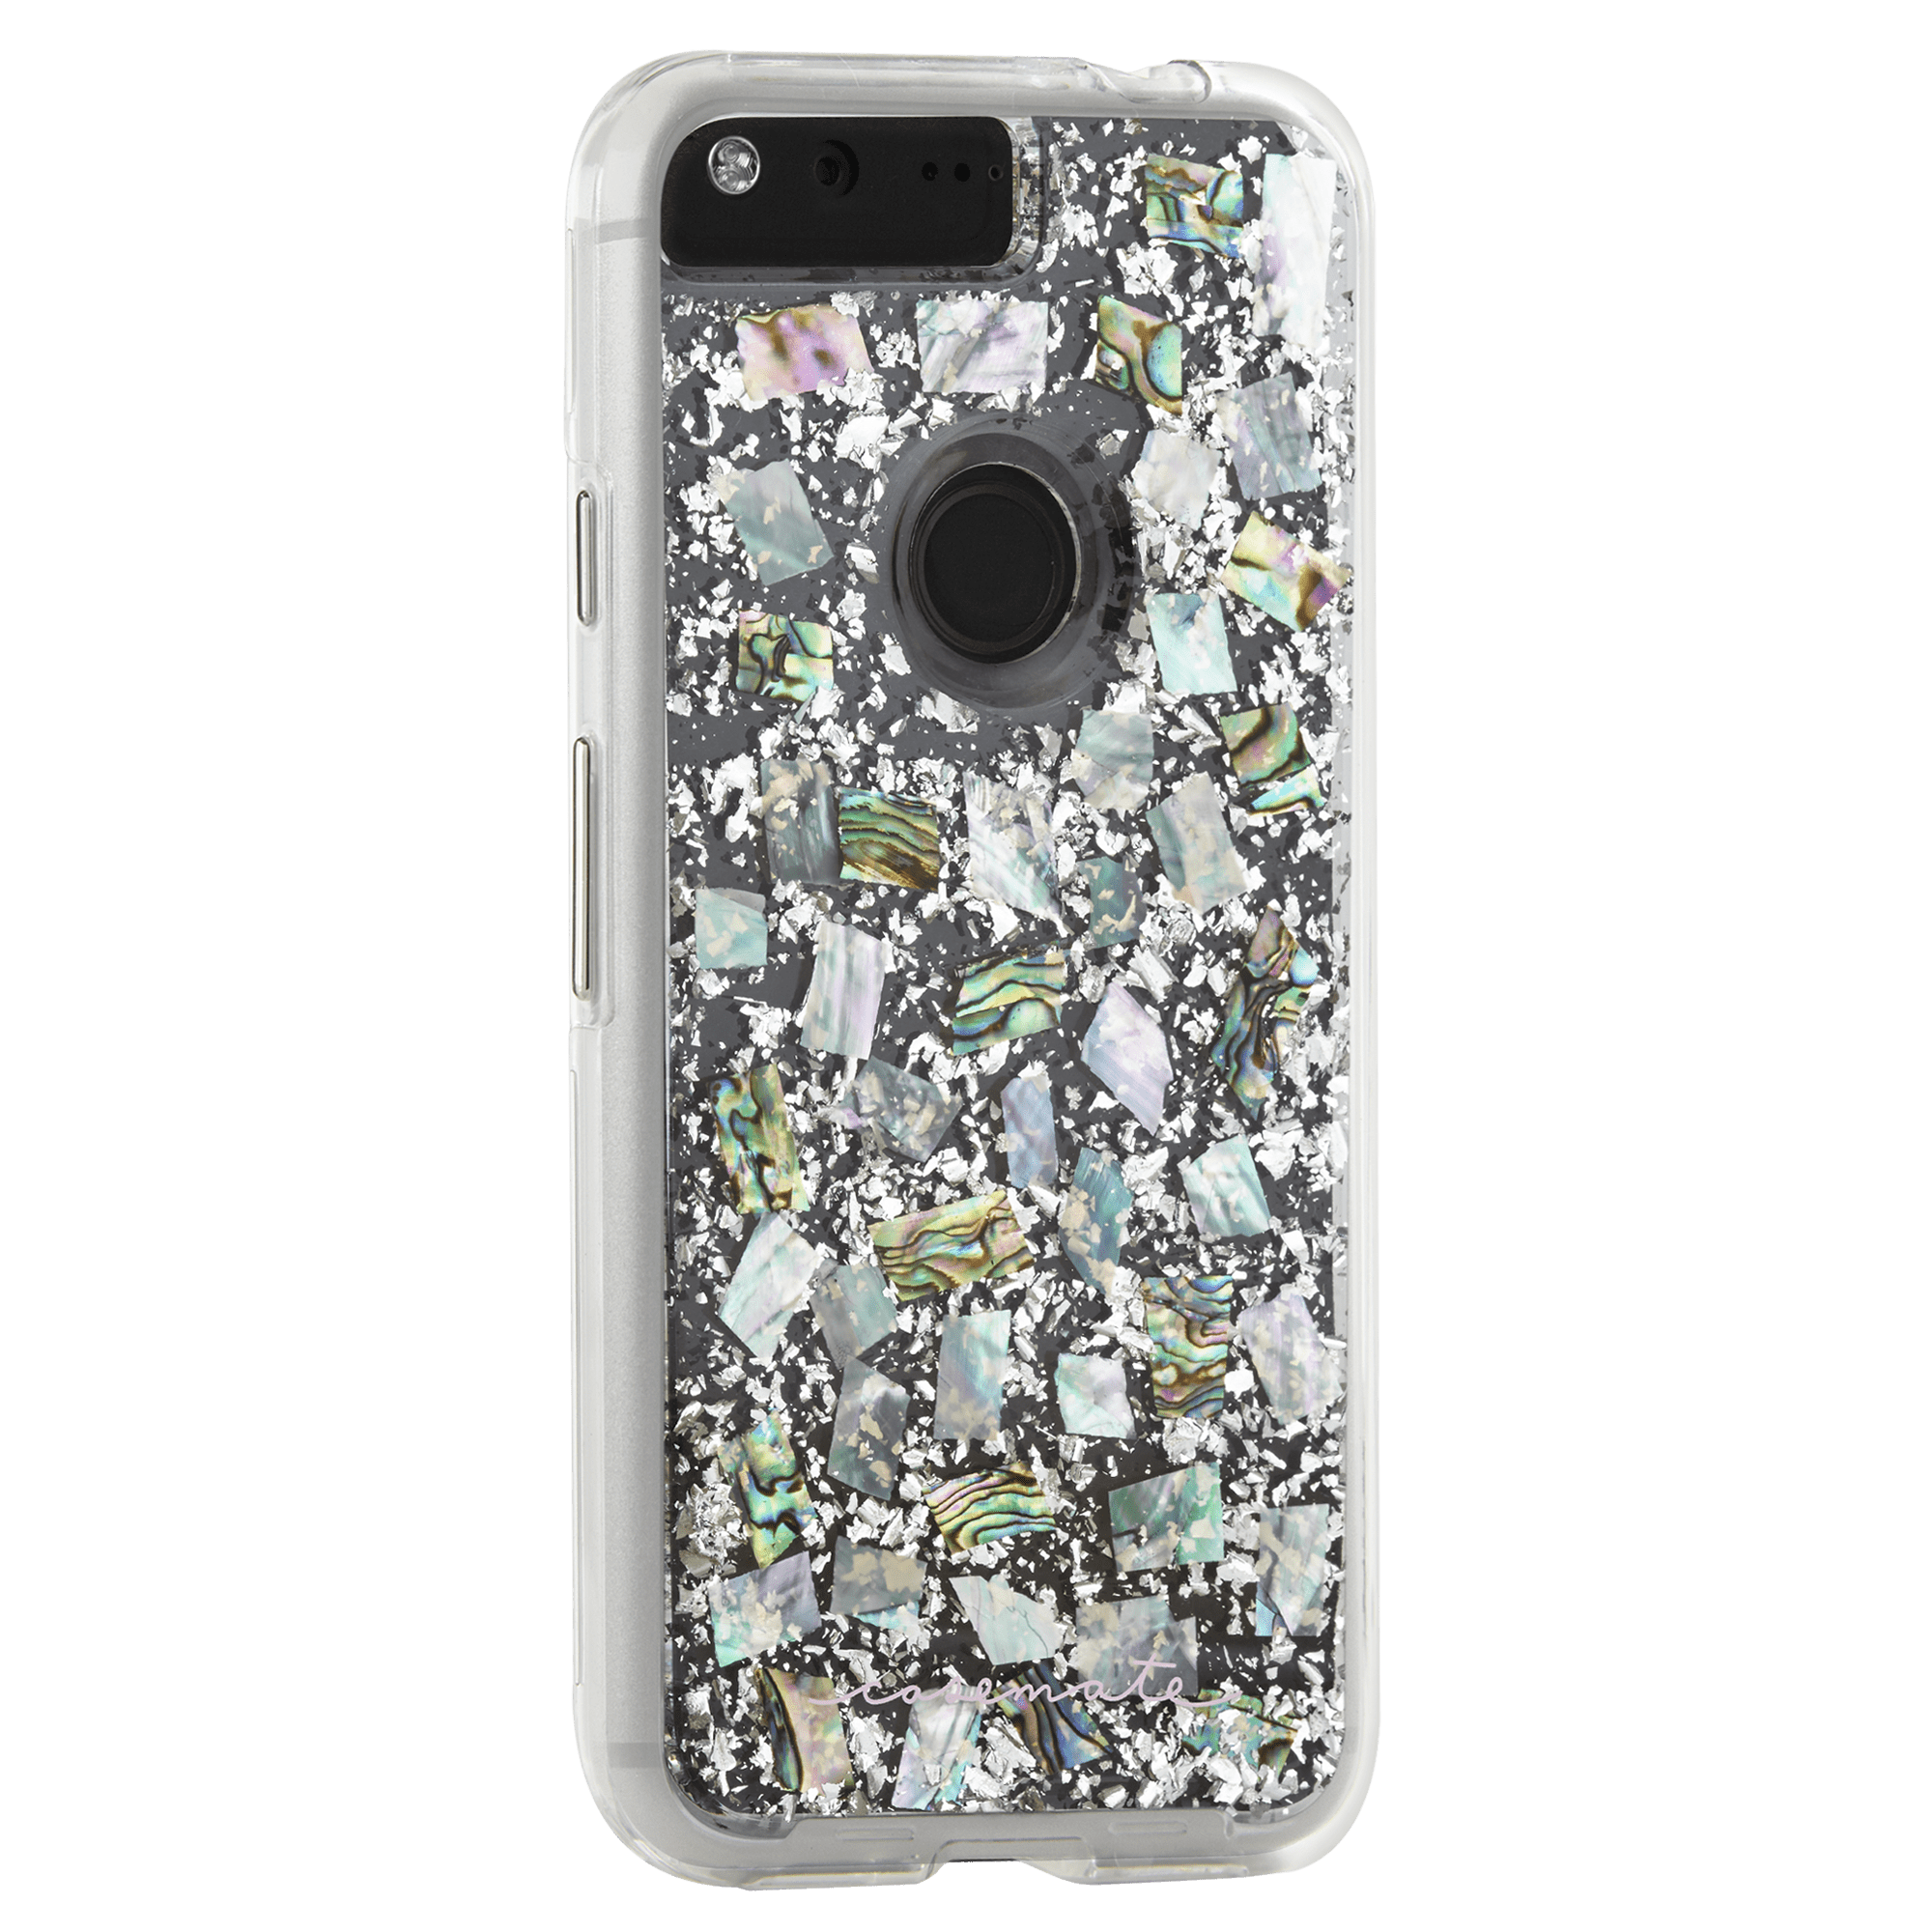 Minimalist Black And White Snake Case For Google Pixel 2 3 3a 4 4a 5 6 7 8  XL